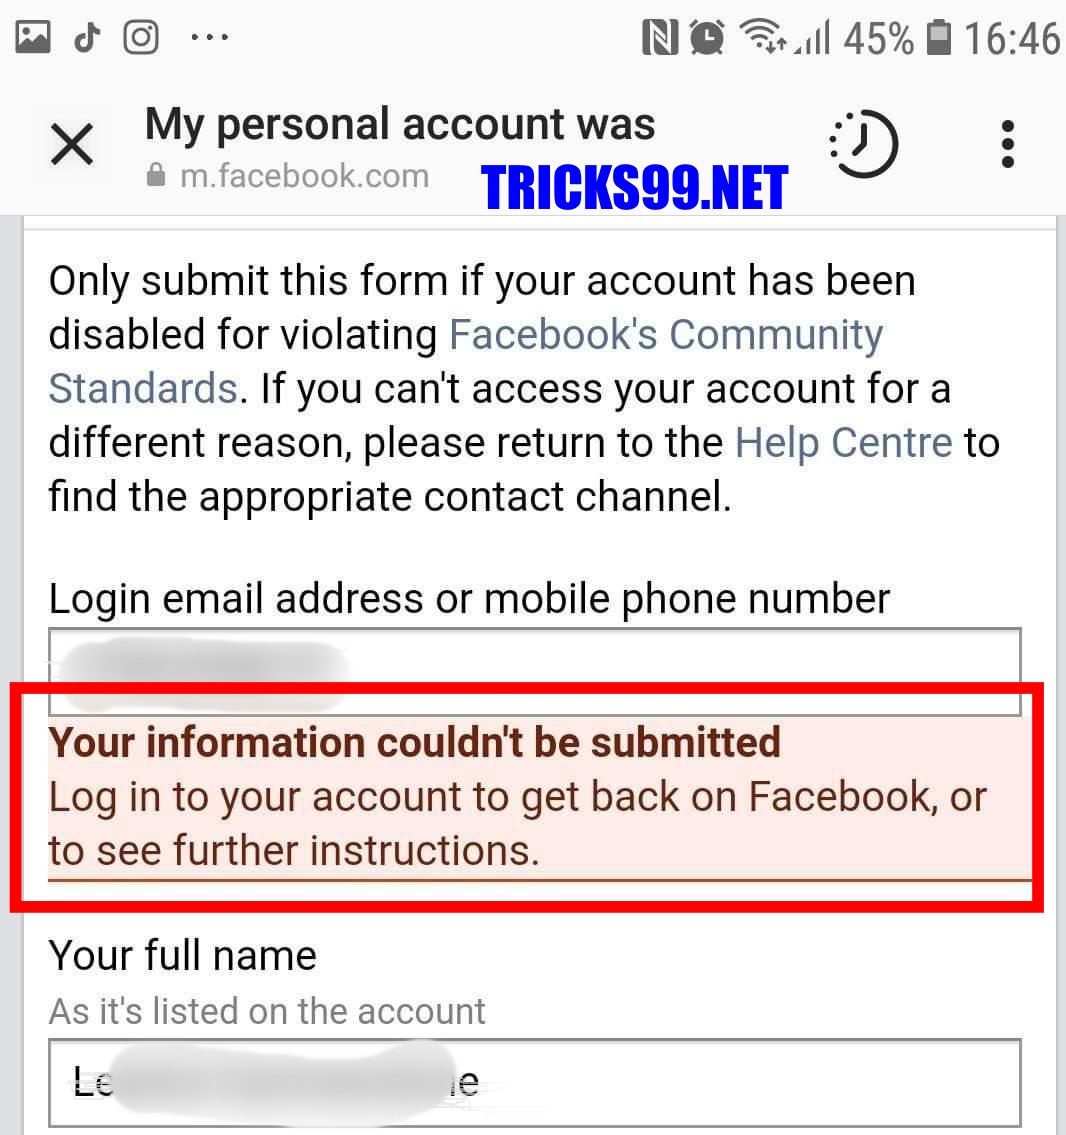 How to Find My Facebook Account by My Name